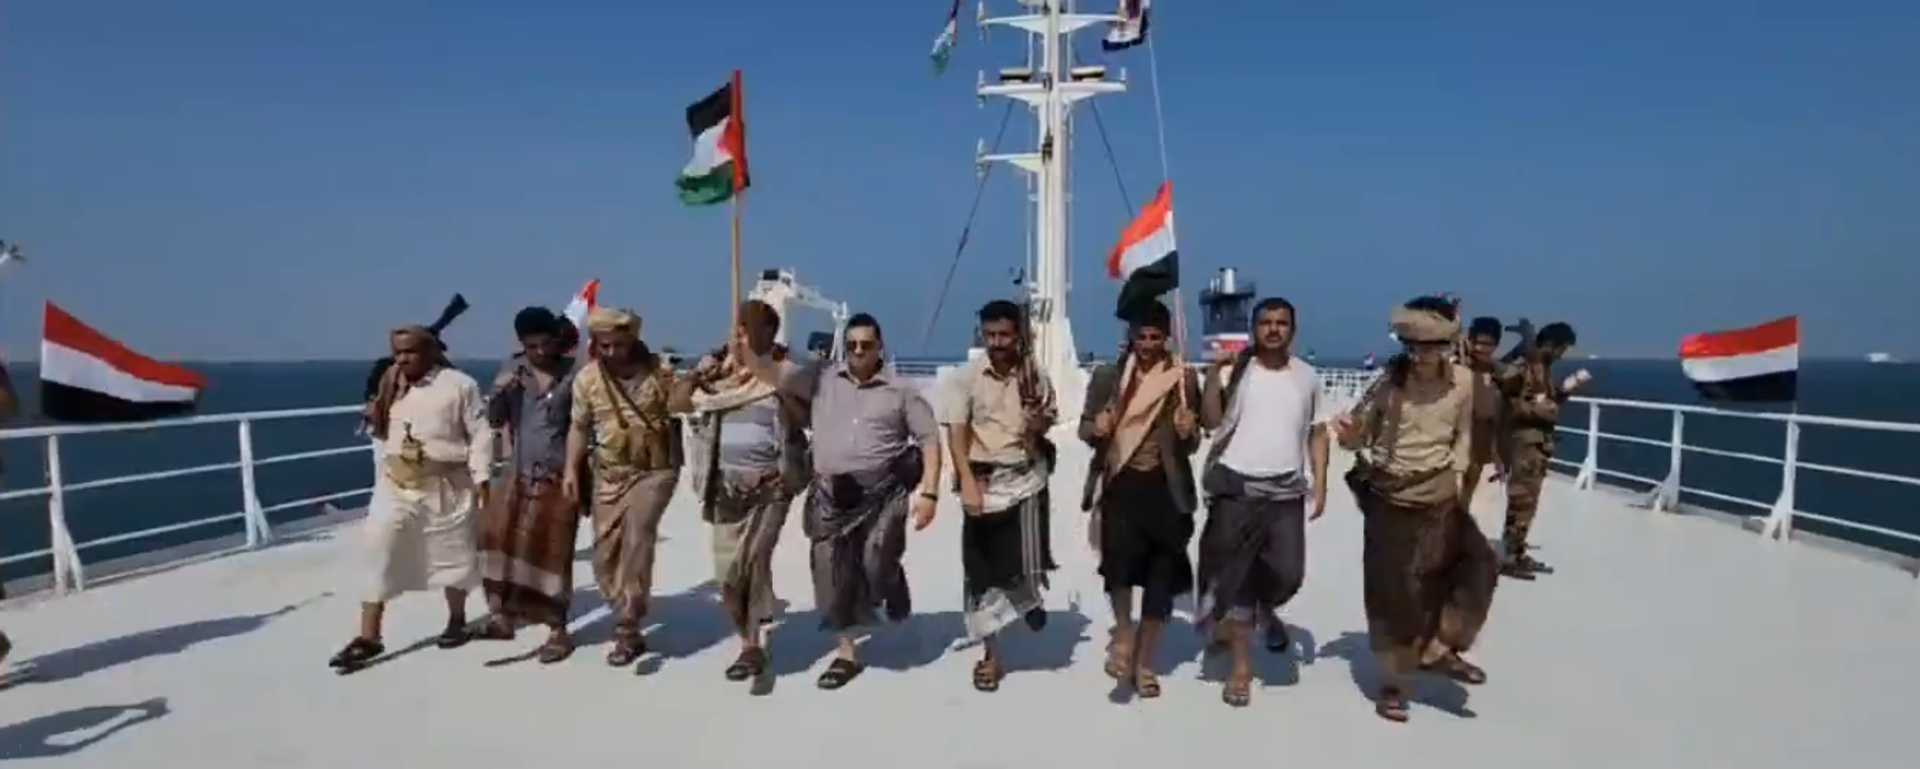 Houthis do their traditional war dance aboard the Galaxy Leader after seizing the Israeli-owned ro-ro car transporter. Screengrab of social media video. - Sputnik International, 1920, 25.12.2023